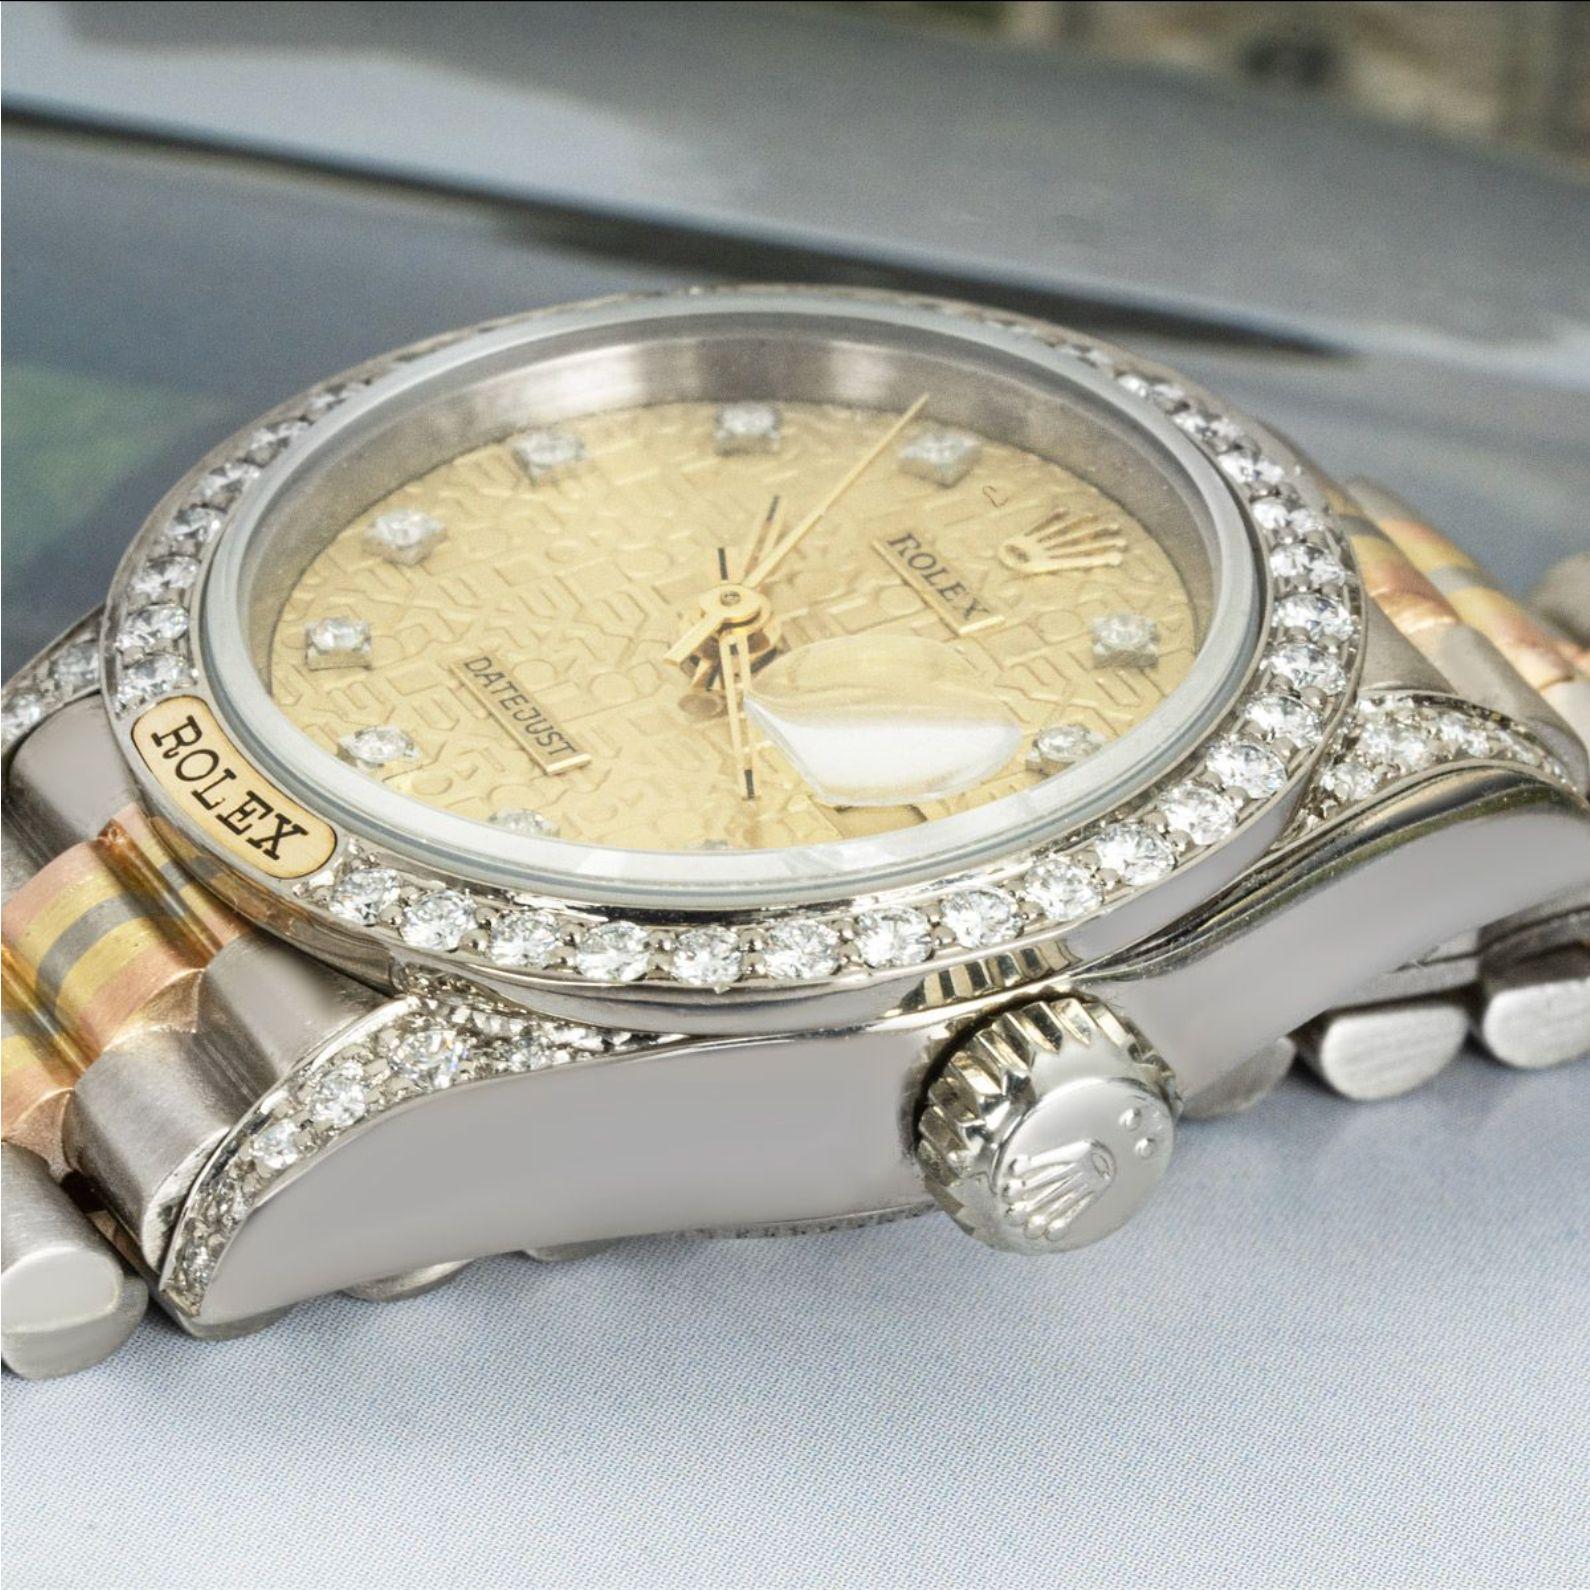 A 26mm ladies Datejust in tri-gold by Rolex. Featuring a champagne dial with diamond set hour markers and a fixed white gold bezel set with 36 round brilliant cut diamonds as well as 24 brilliant cut diamond set lugs.

Fitted with a sapphire glass,